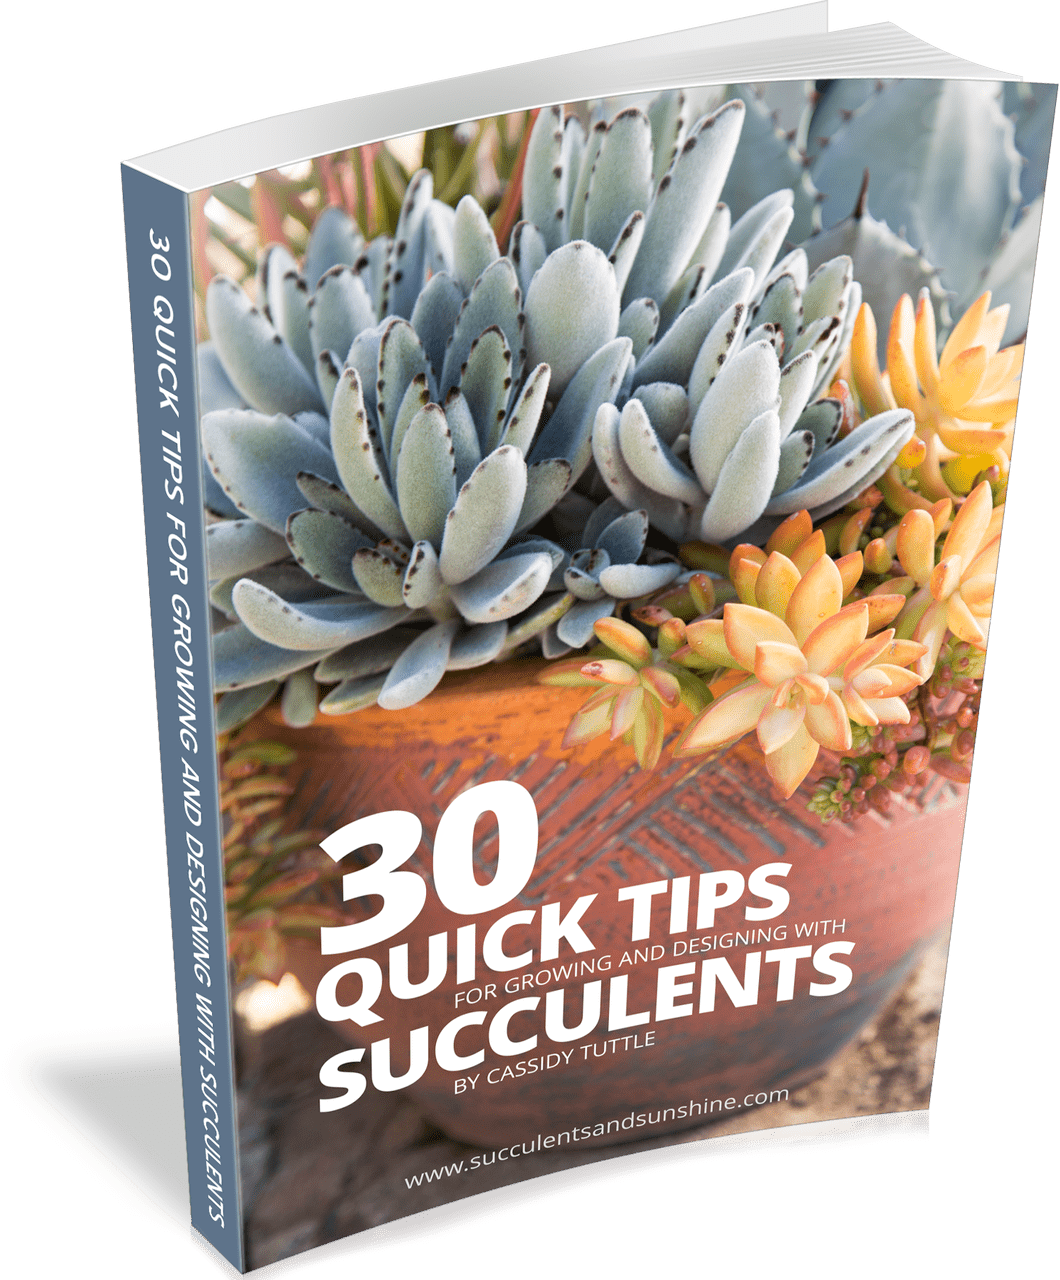 30 quick tips succulents book cover.